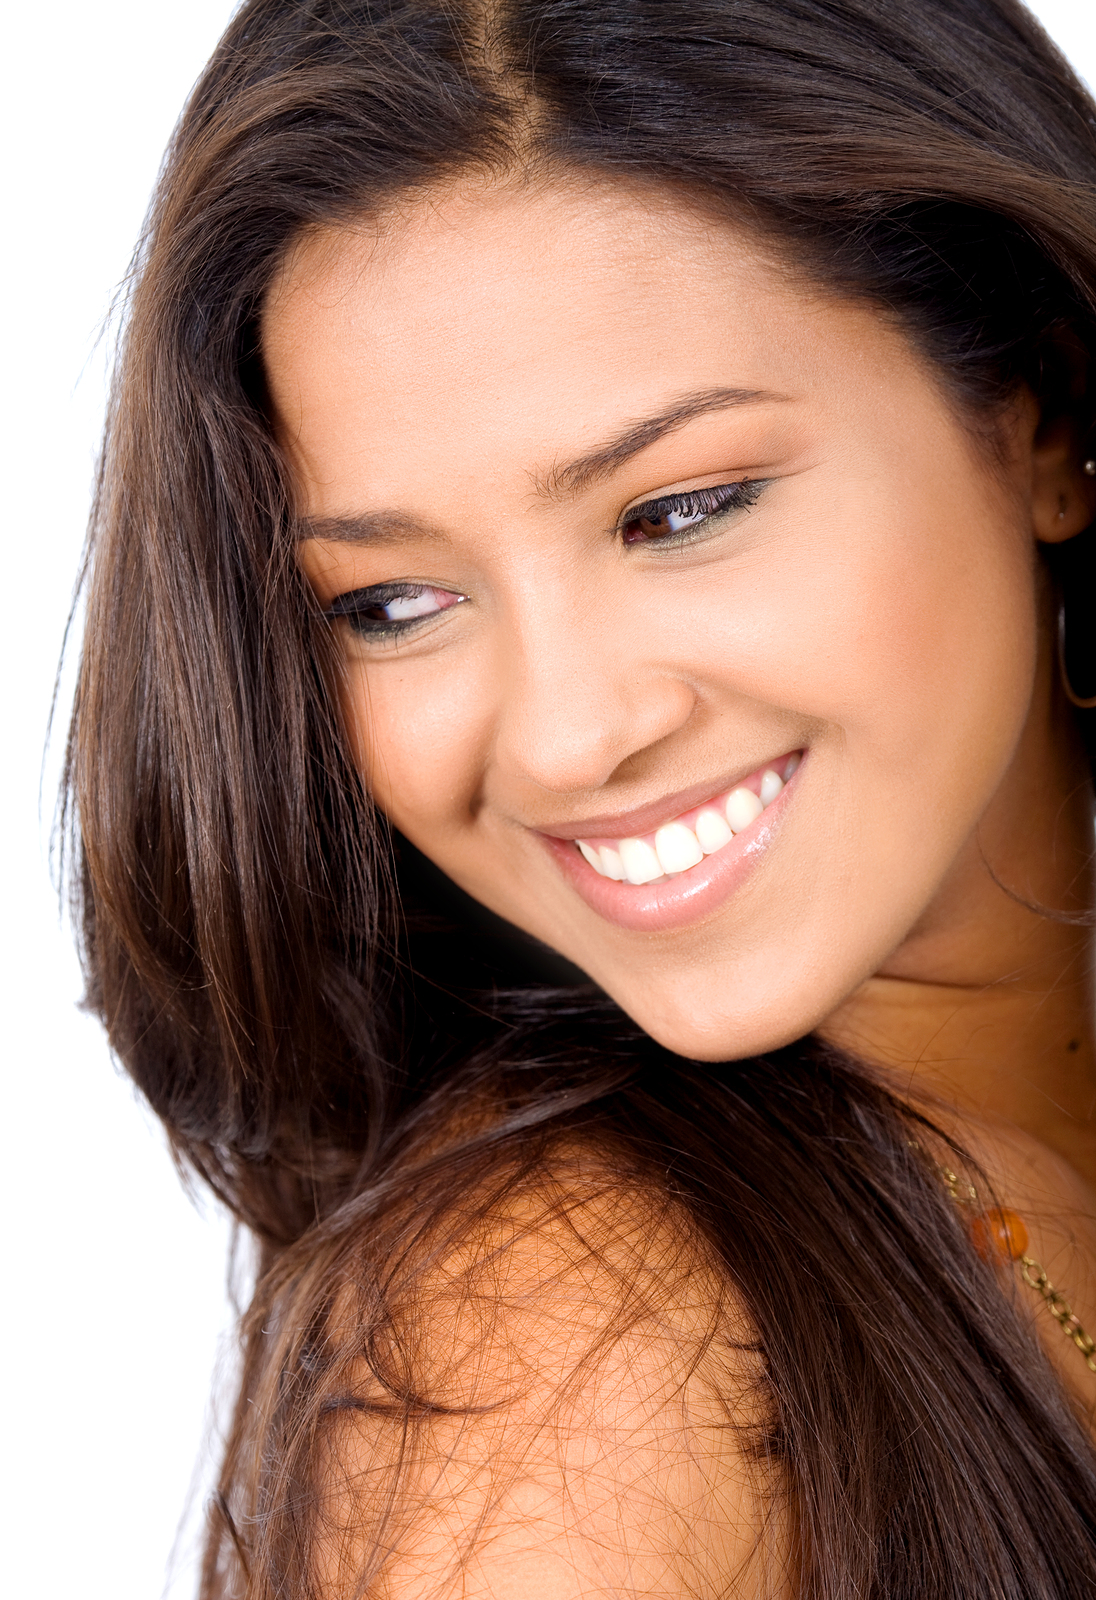 Cosmetic Dentistry | Dentist in Southington, CT | Weiss Advance Dentistry